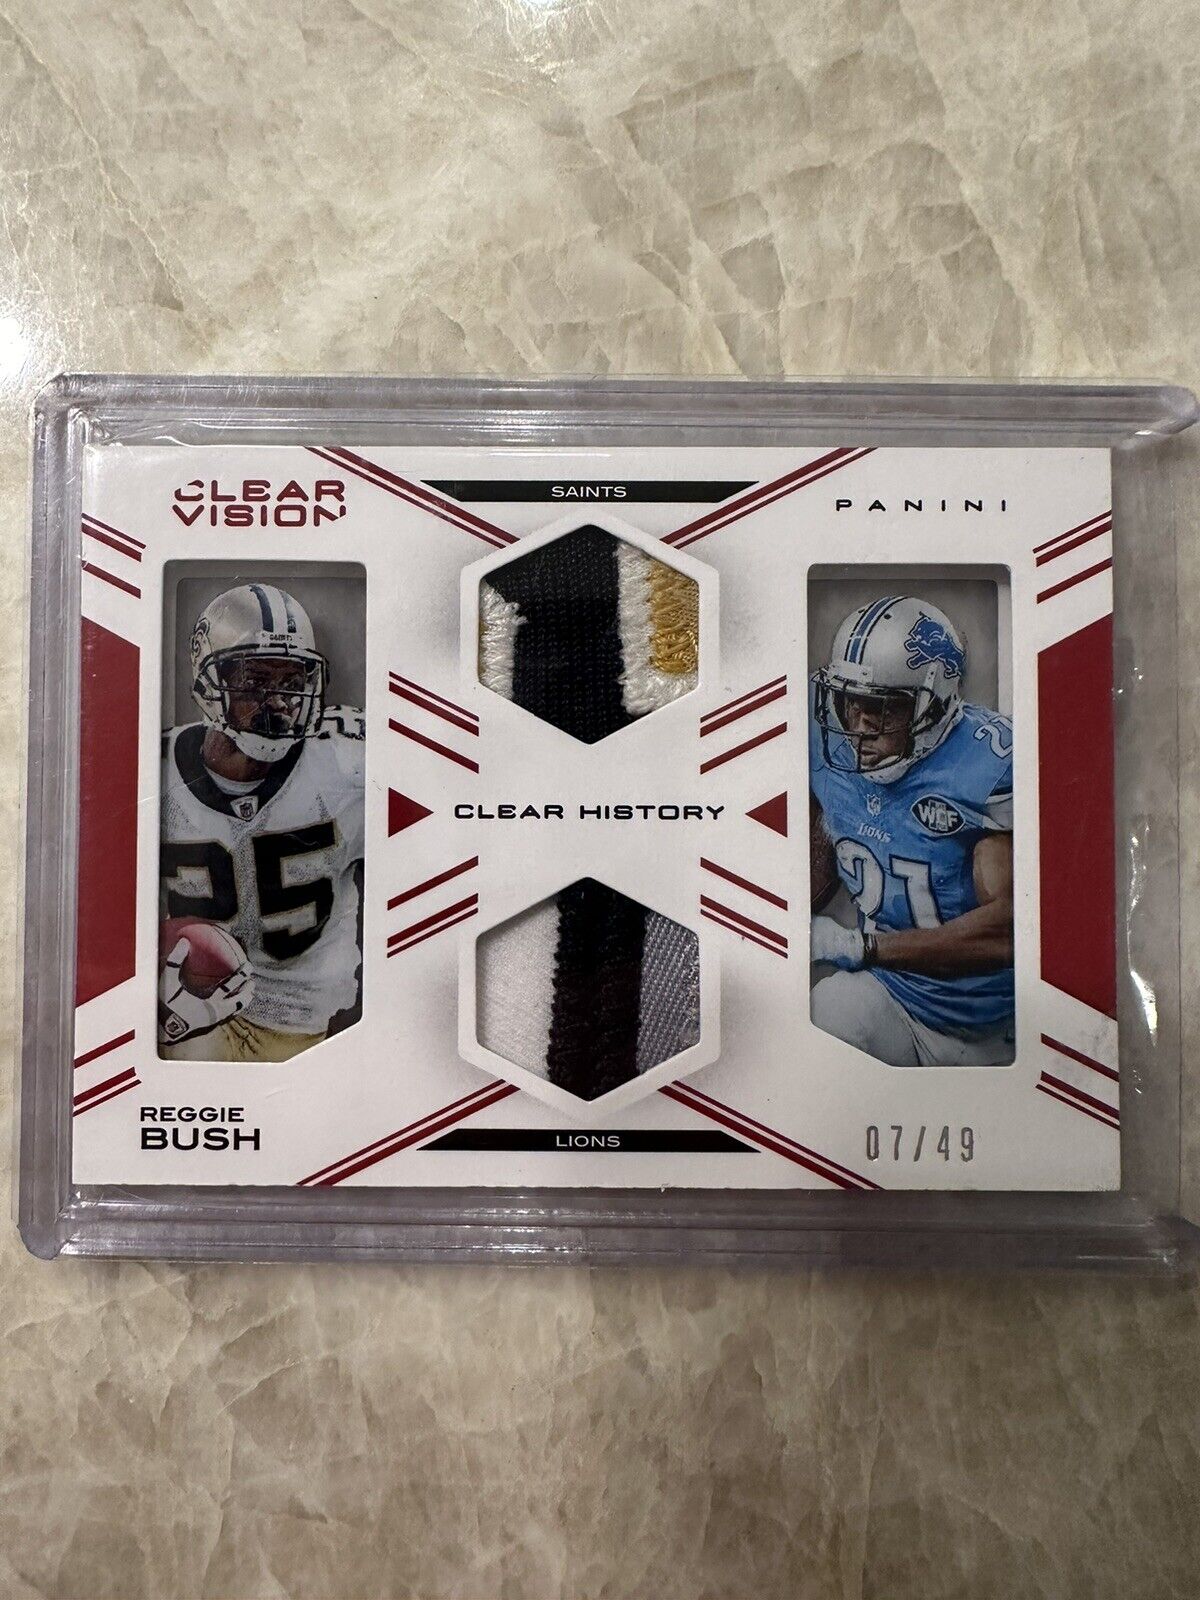 2015 Panini Clear Vision History Reggie Bush NFL Game Worn Jersey Patch Card /49